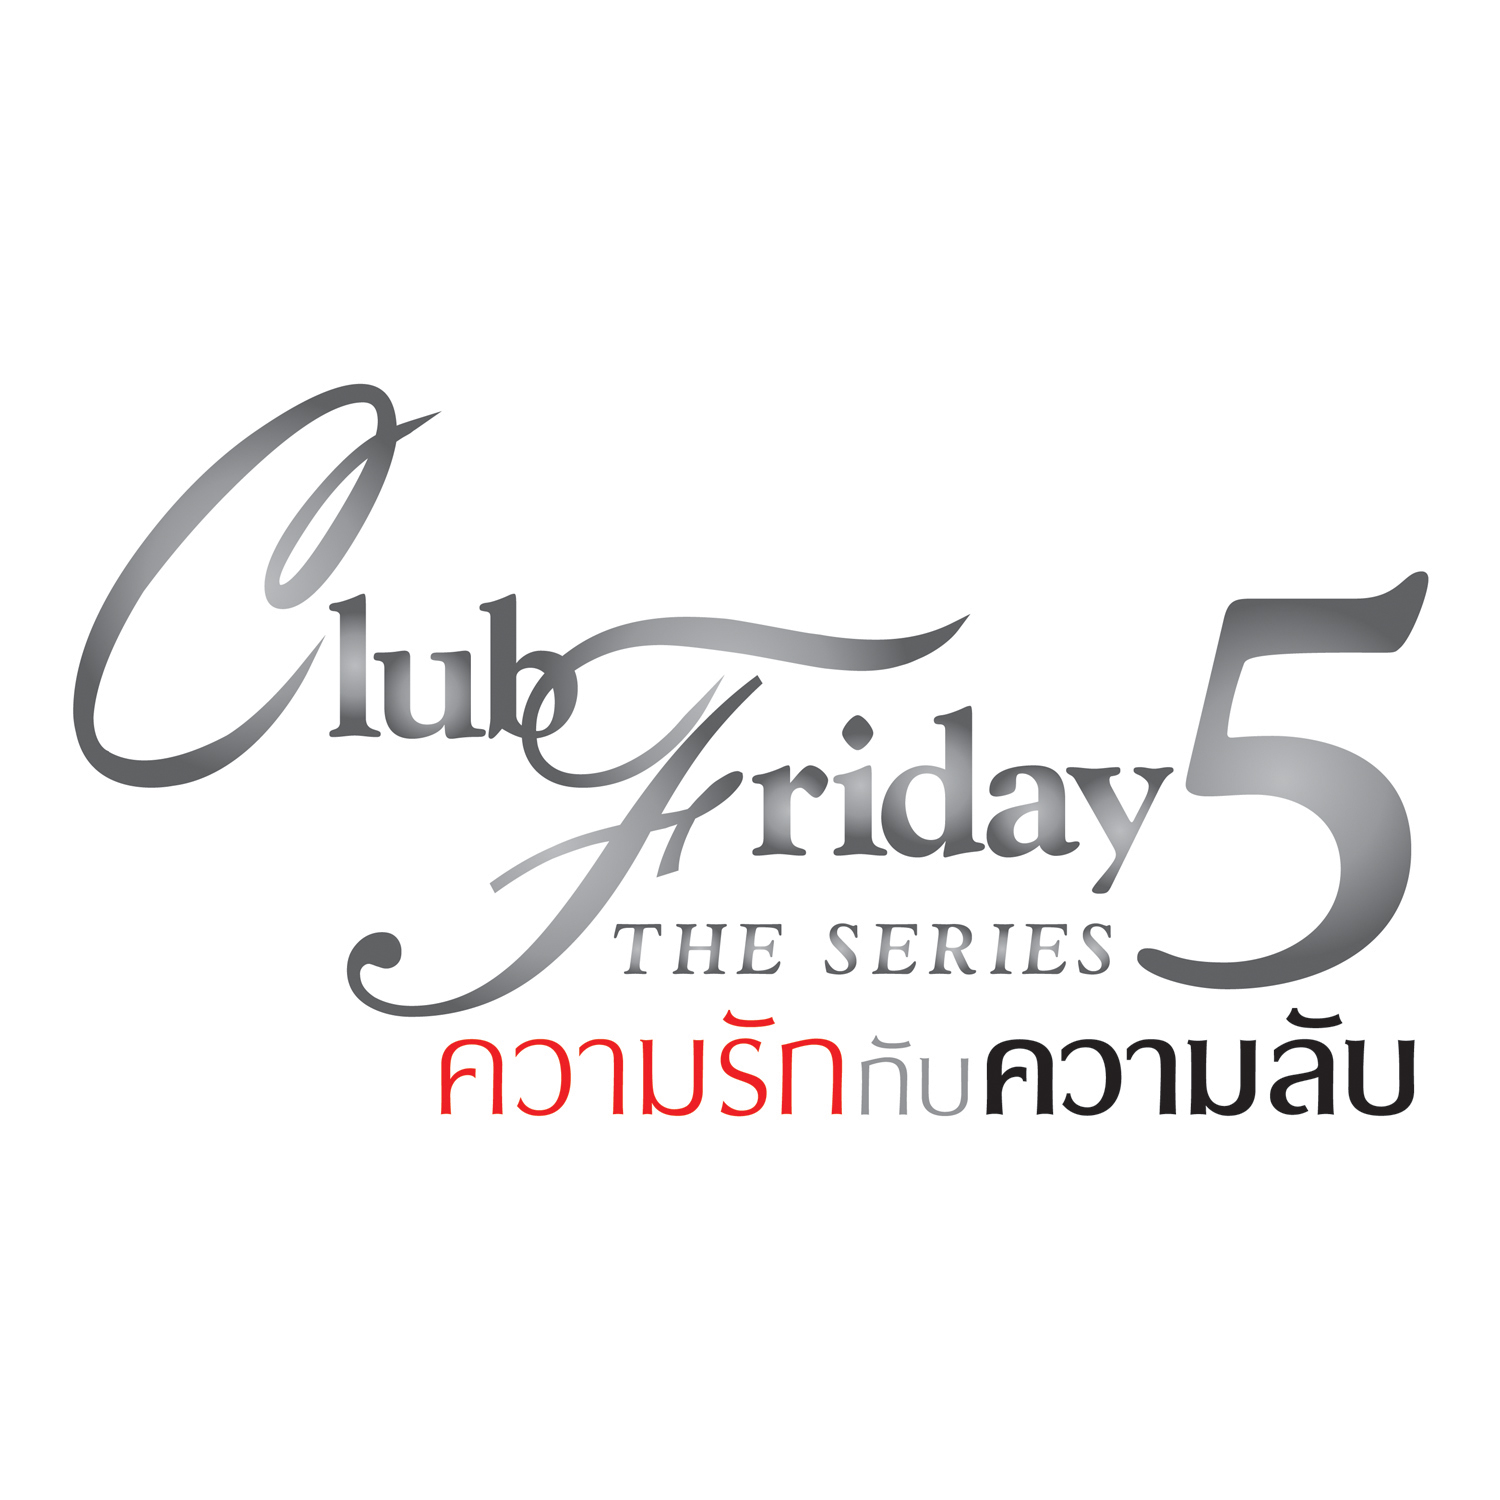 " Club Friday The Series 5 "